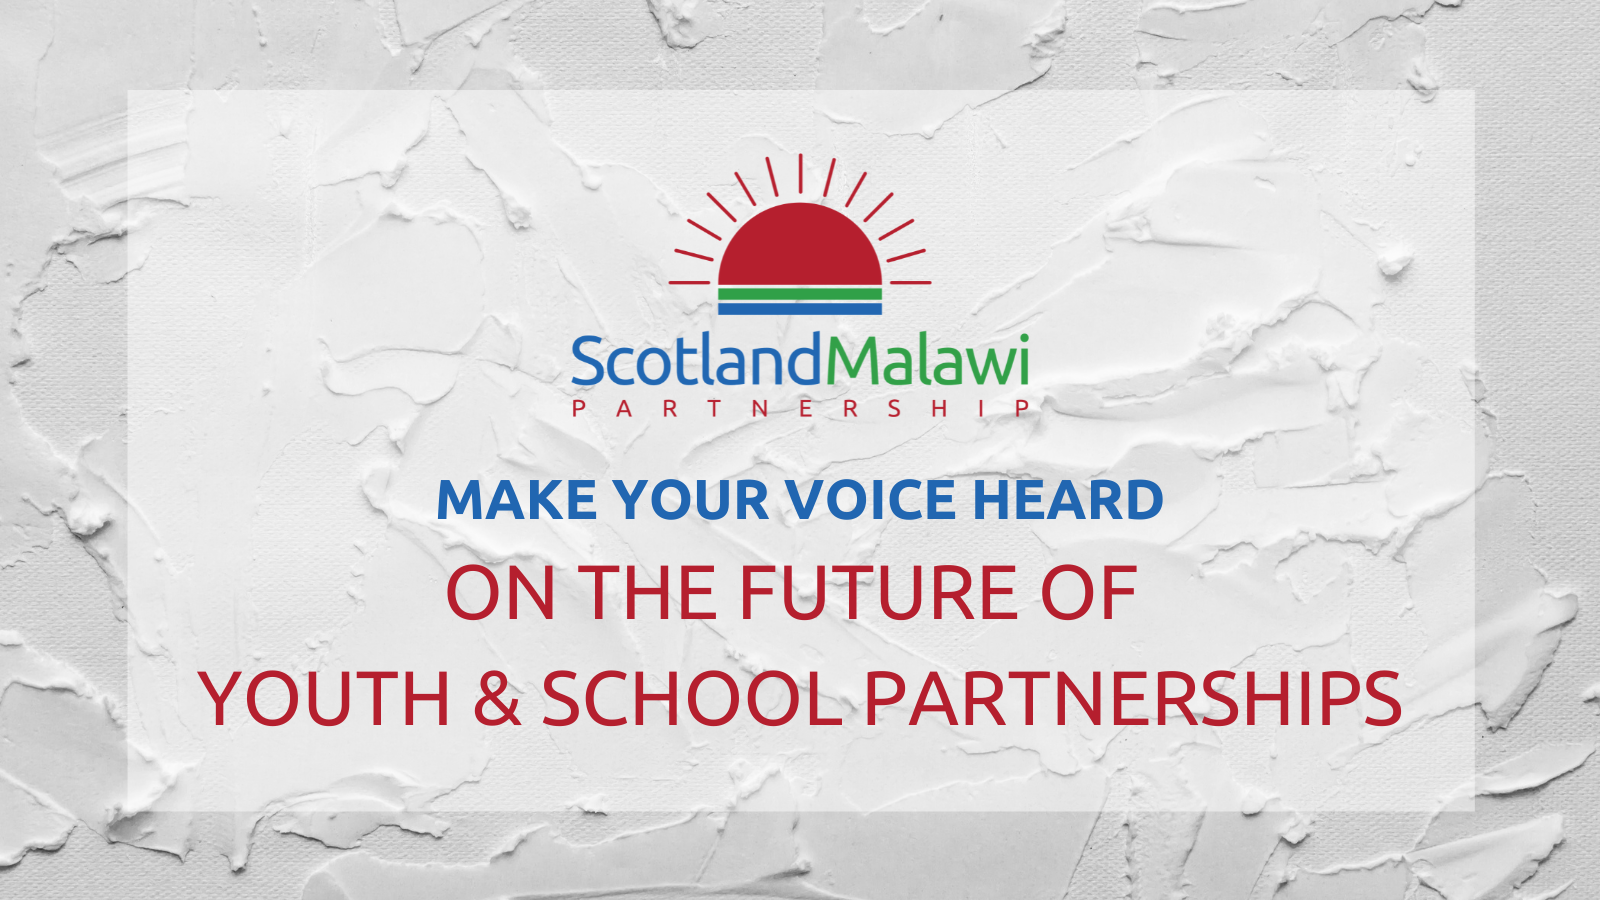 Eventbrite YOUR VOICE ON THE FUTURE OF SCHOOL PARTNERSHIPS